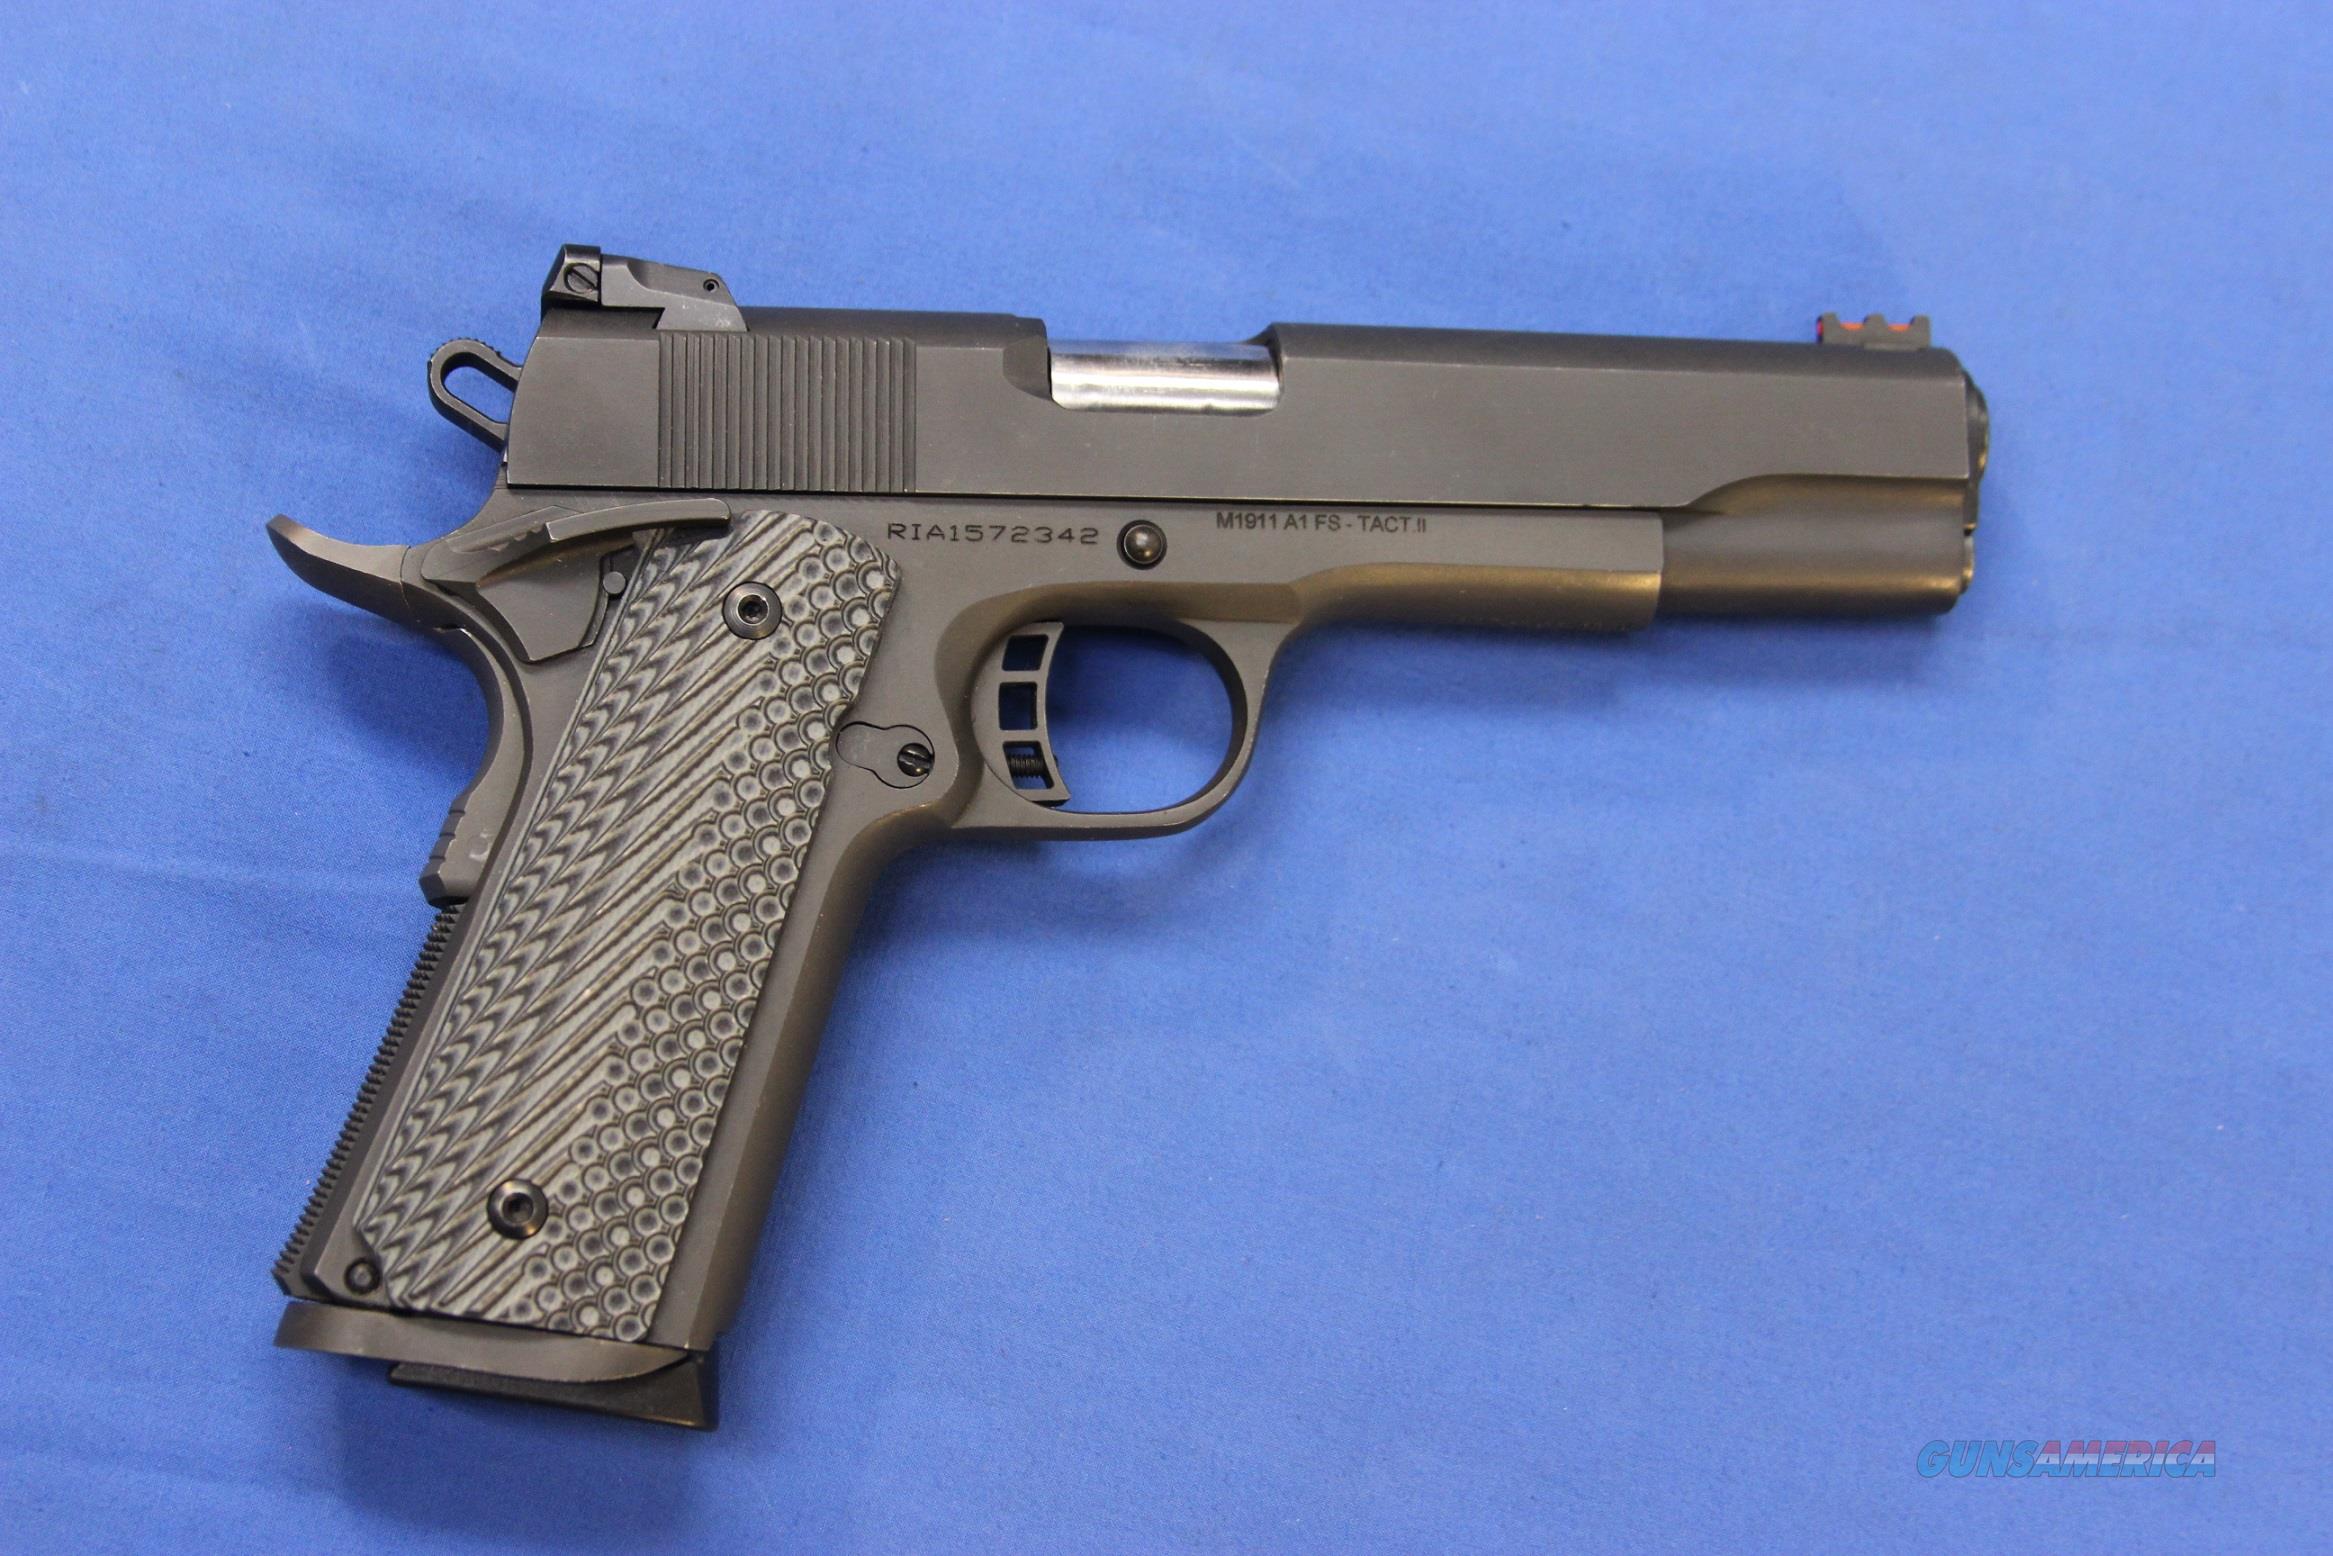 Rock Island Armory 1911 A1 Fs Tacti For Sale At 986535394 4123